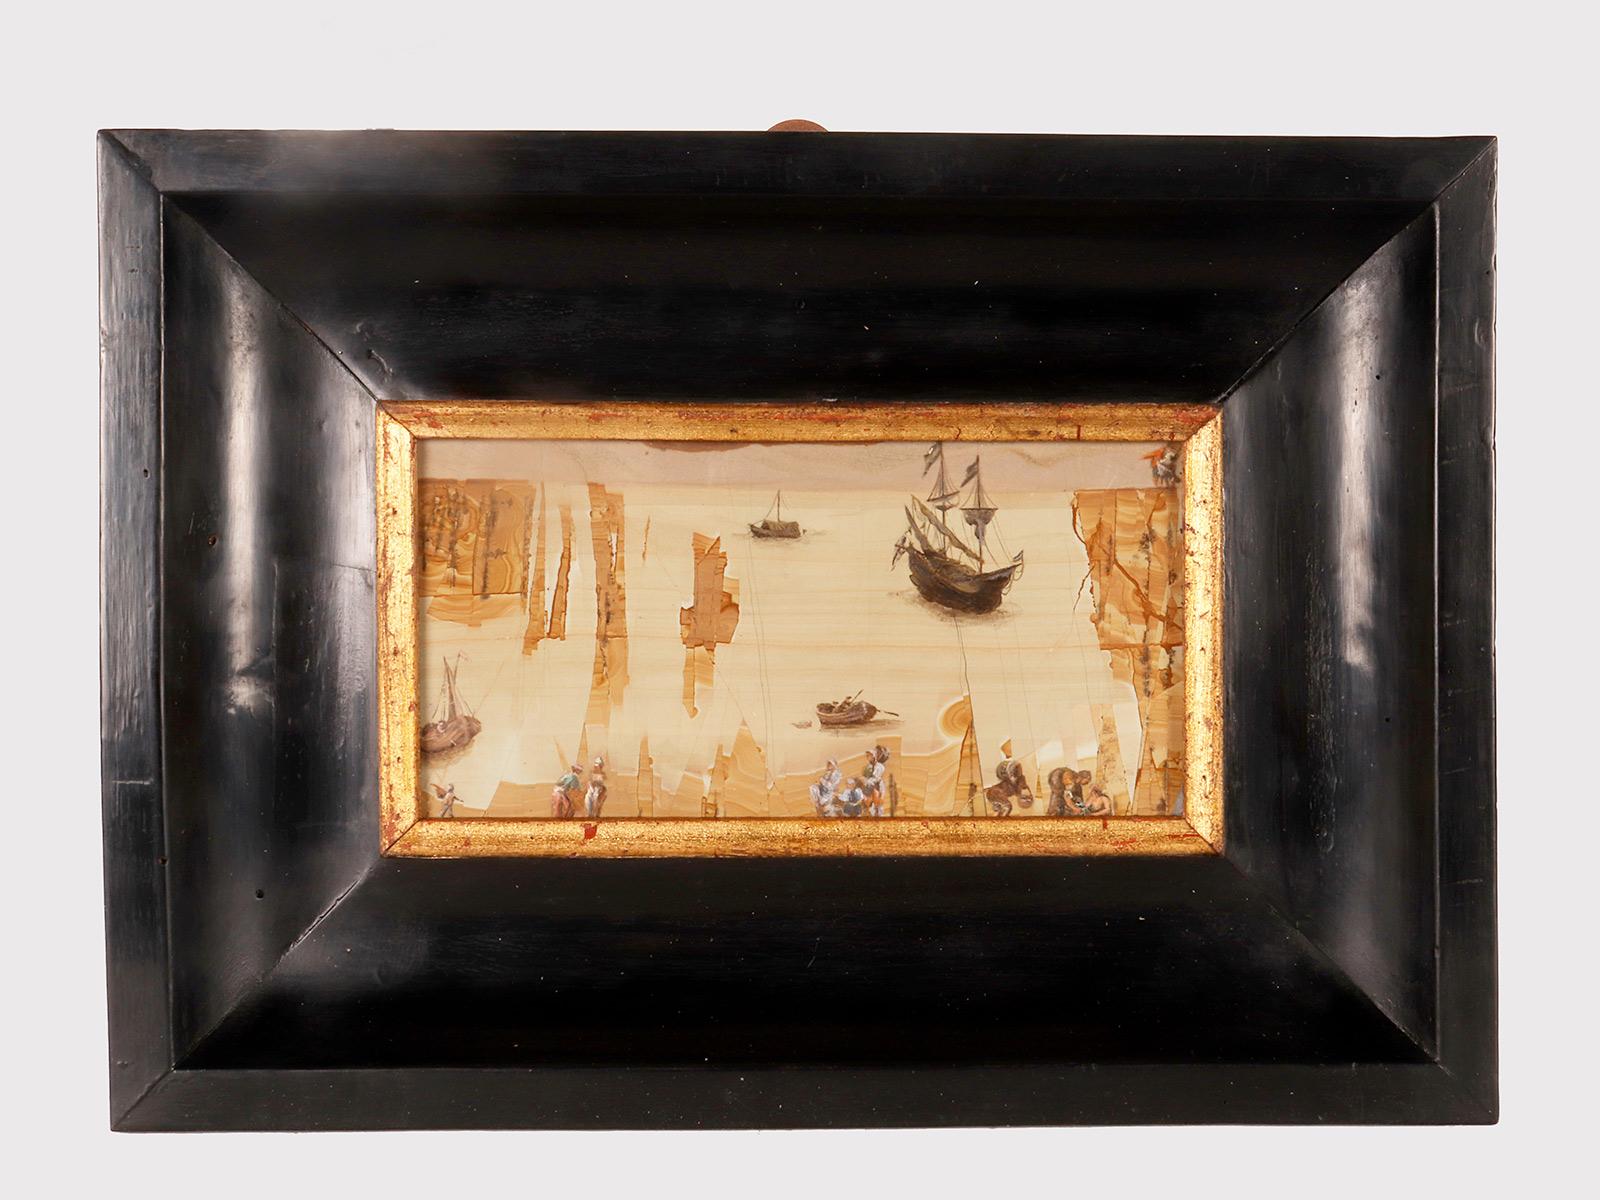 An oil painting of Paesena. The frame, made of ebonized walnut wood finished in wax, has a rectangular shape with an internal signature that flares out towards the inside to accommodate the painting, finished with a stop in golden ramin wood.